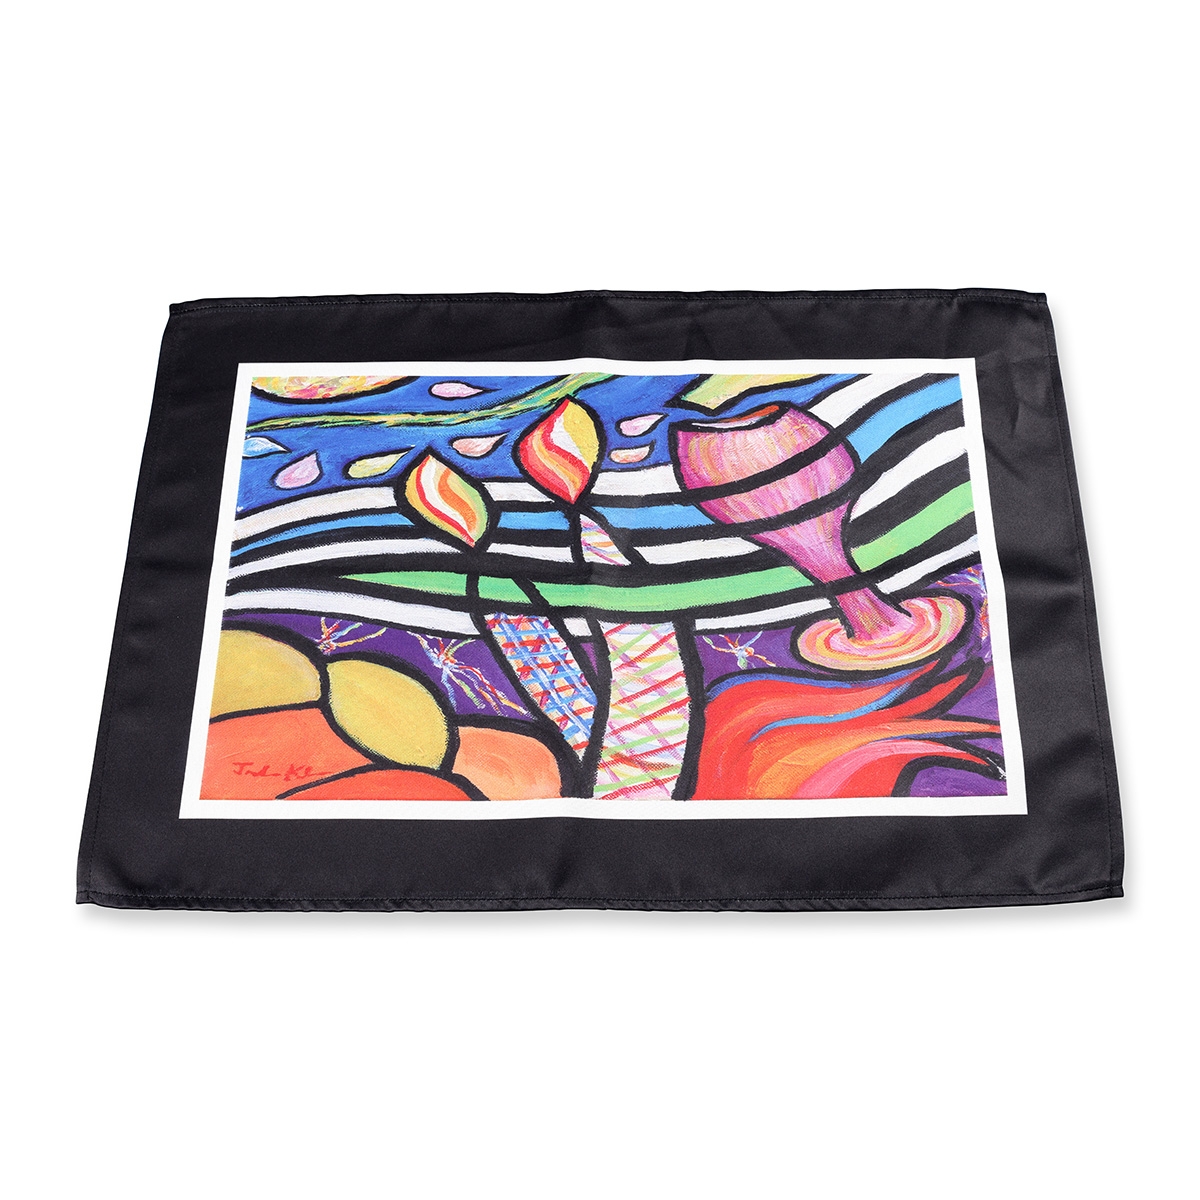 Jordana Klein Flowing Kiddush and Candles Design Challah Cover - 1